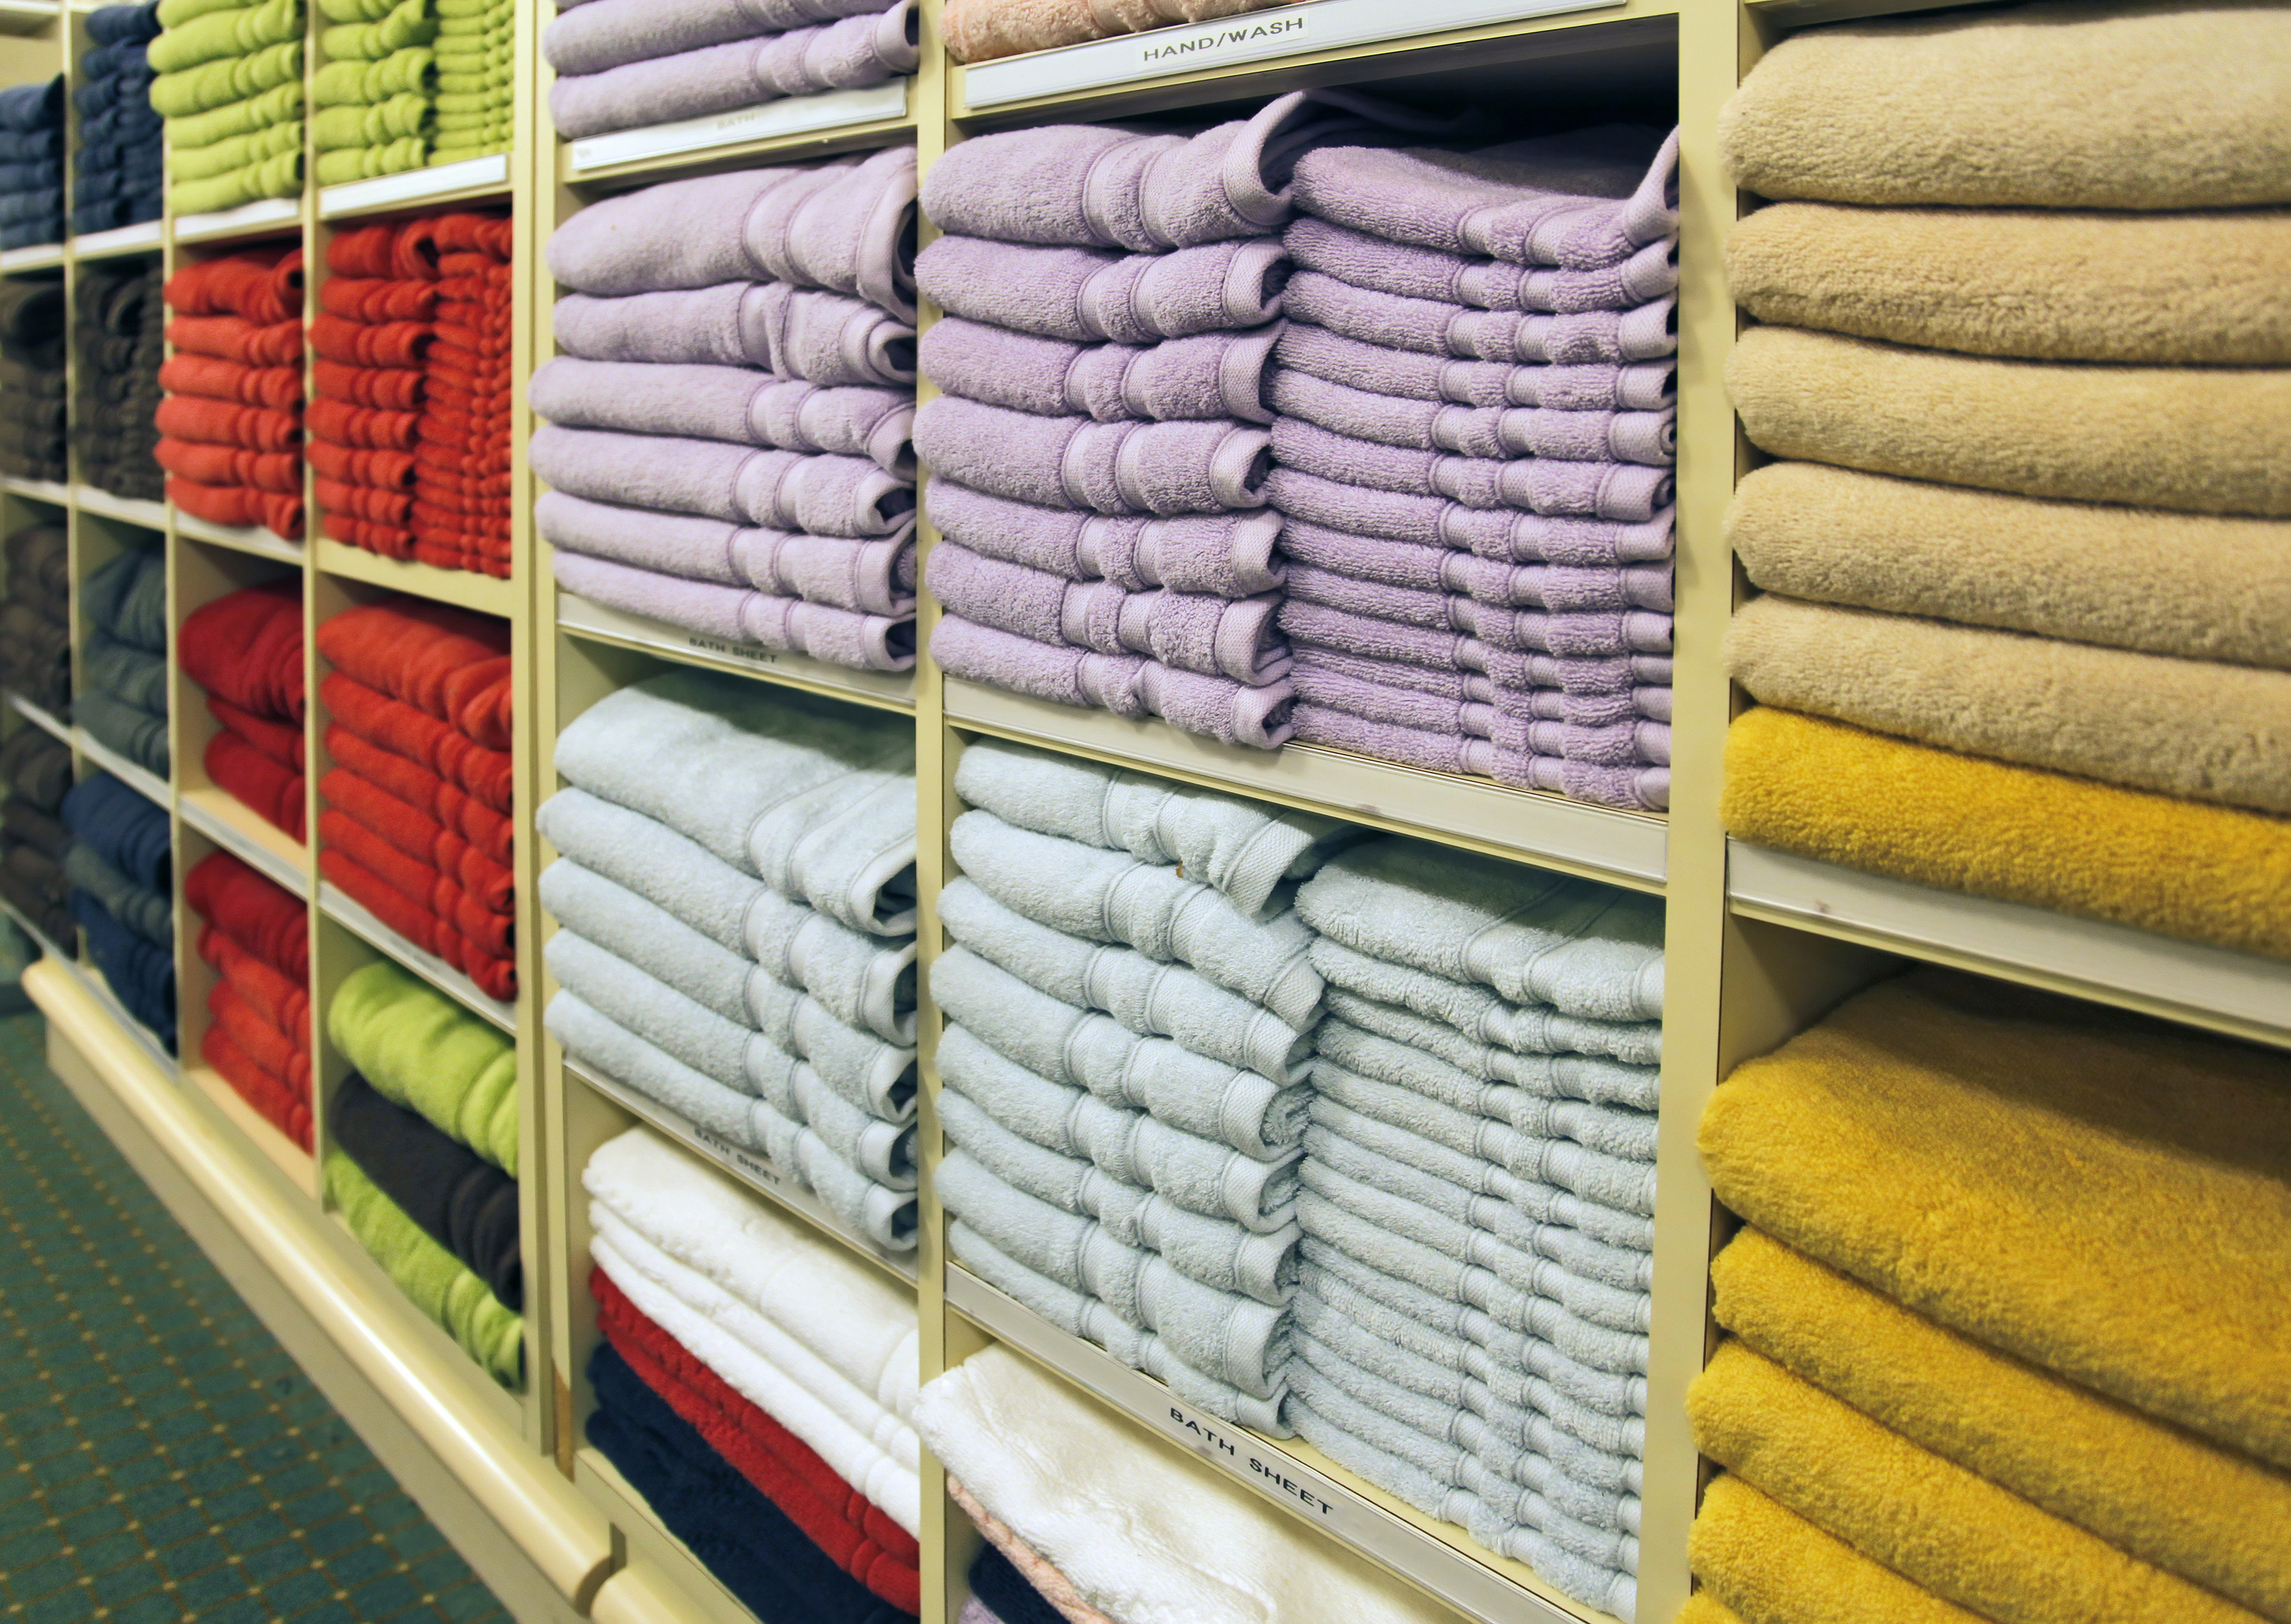 A wall of towels for sale in a store